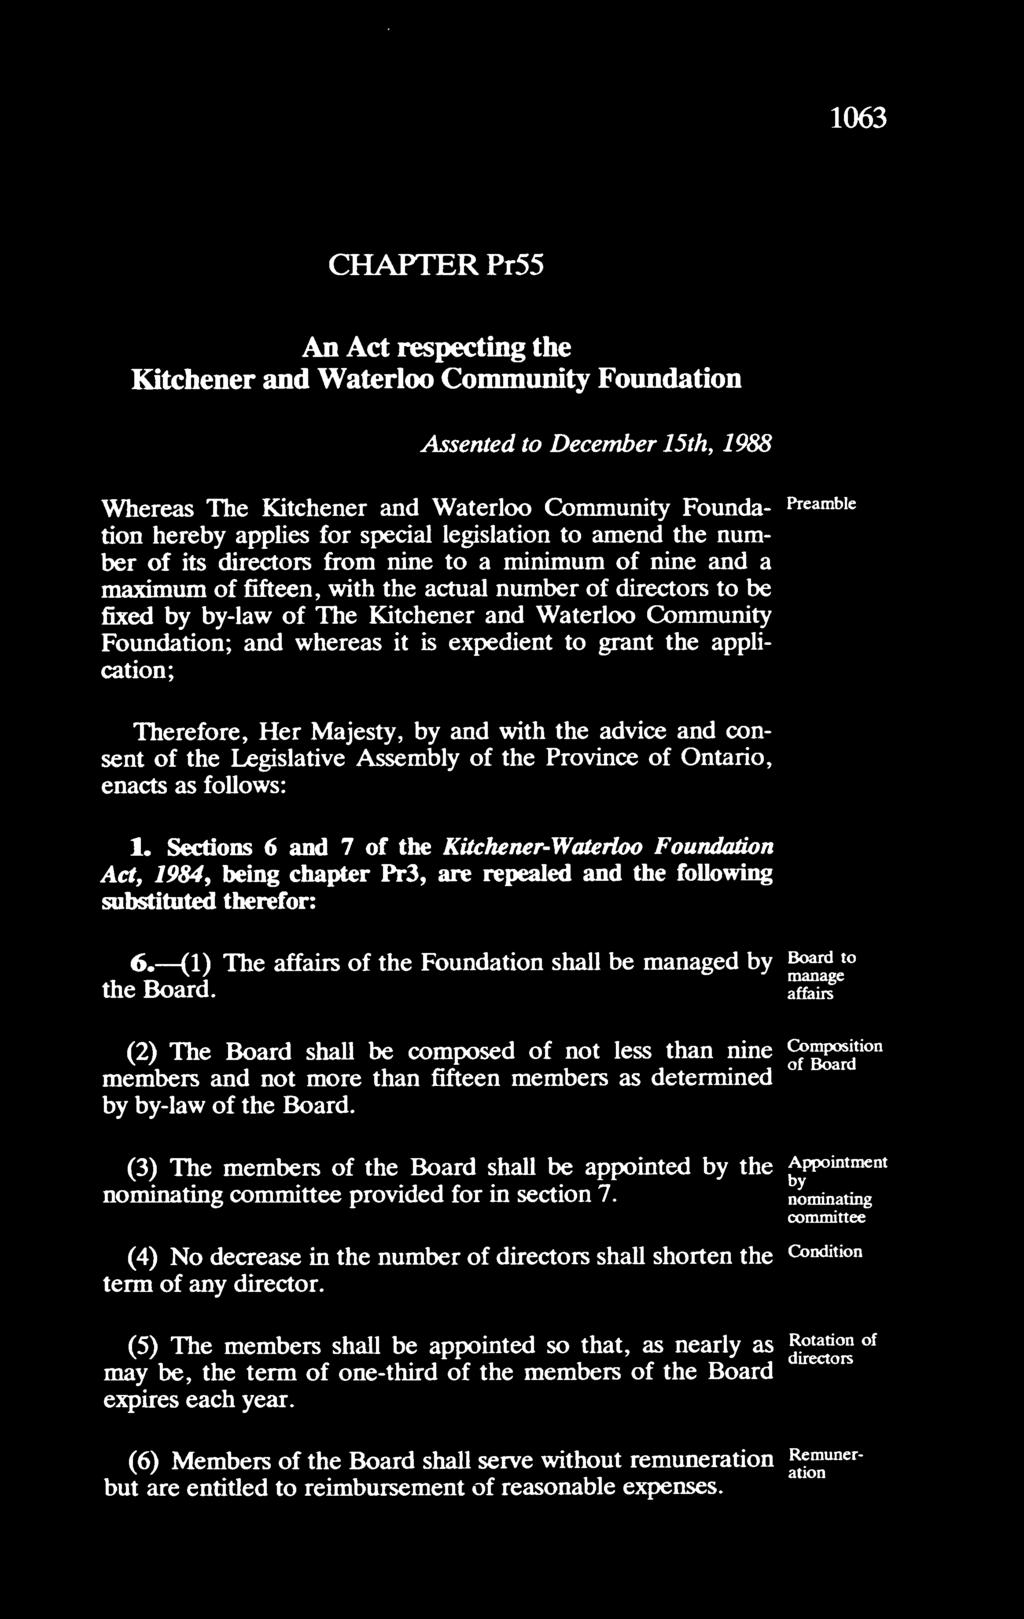 Community Foundation; and whereas it is expedient to grant the appucation; Preamble Therefore, Her Majesty, by and with the advice and consent of the Legislative Assembly of the Province of Ontario,